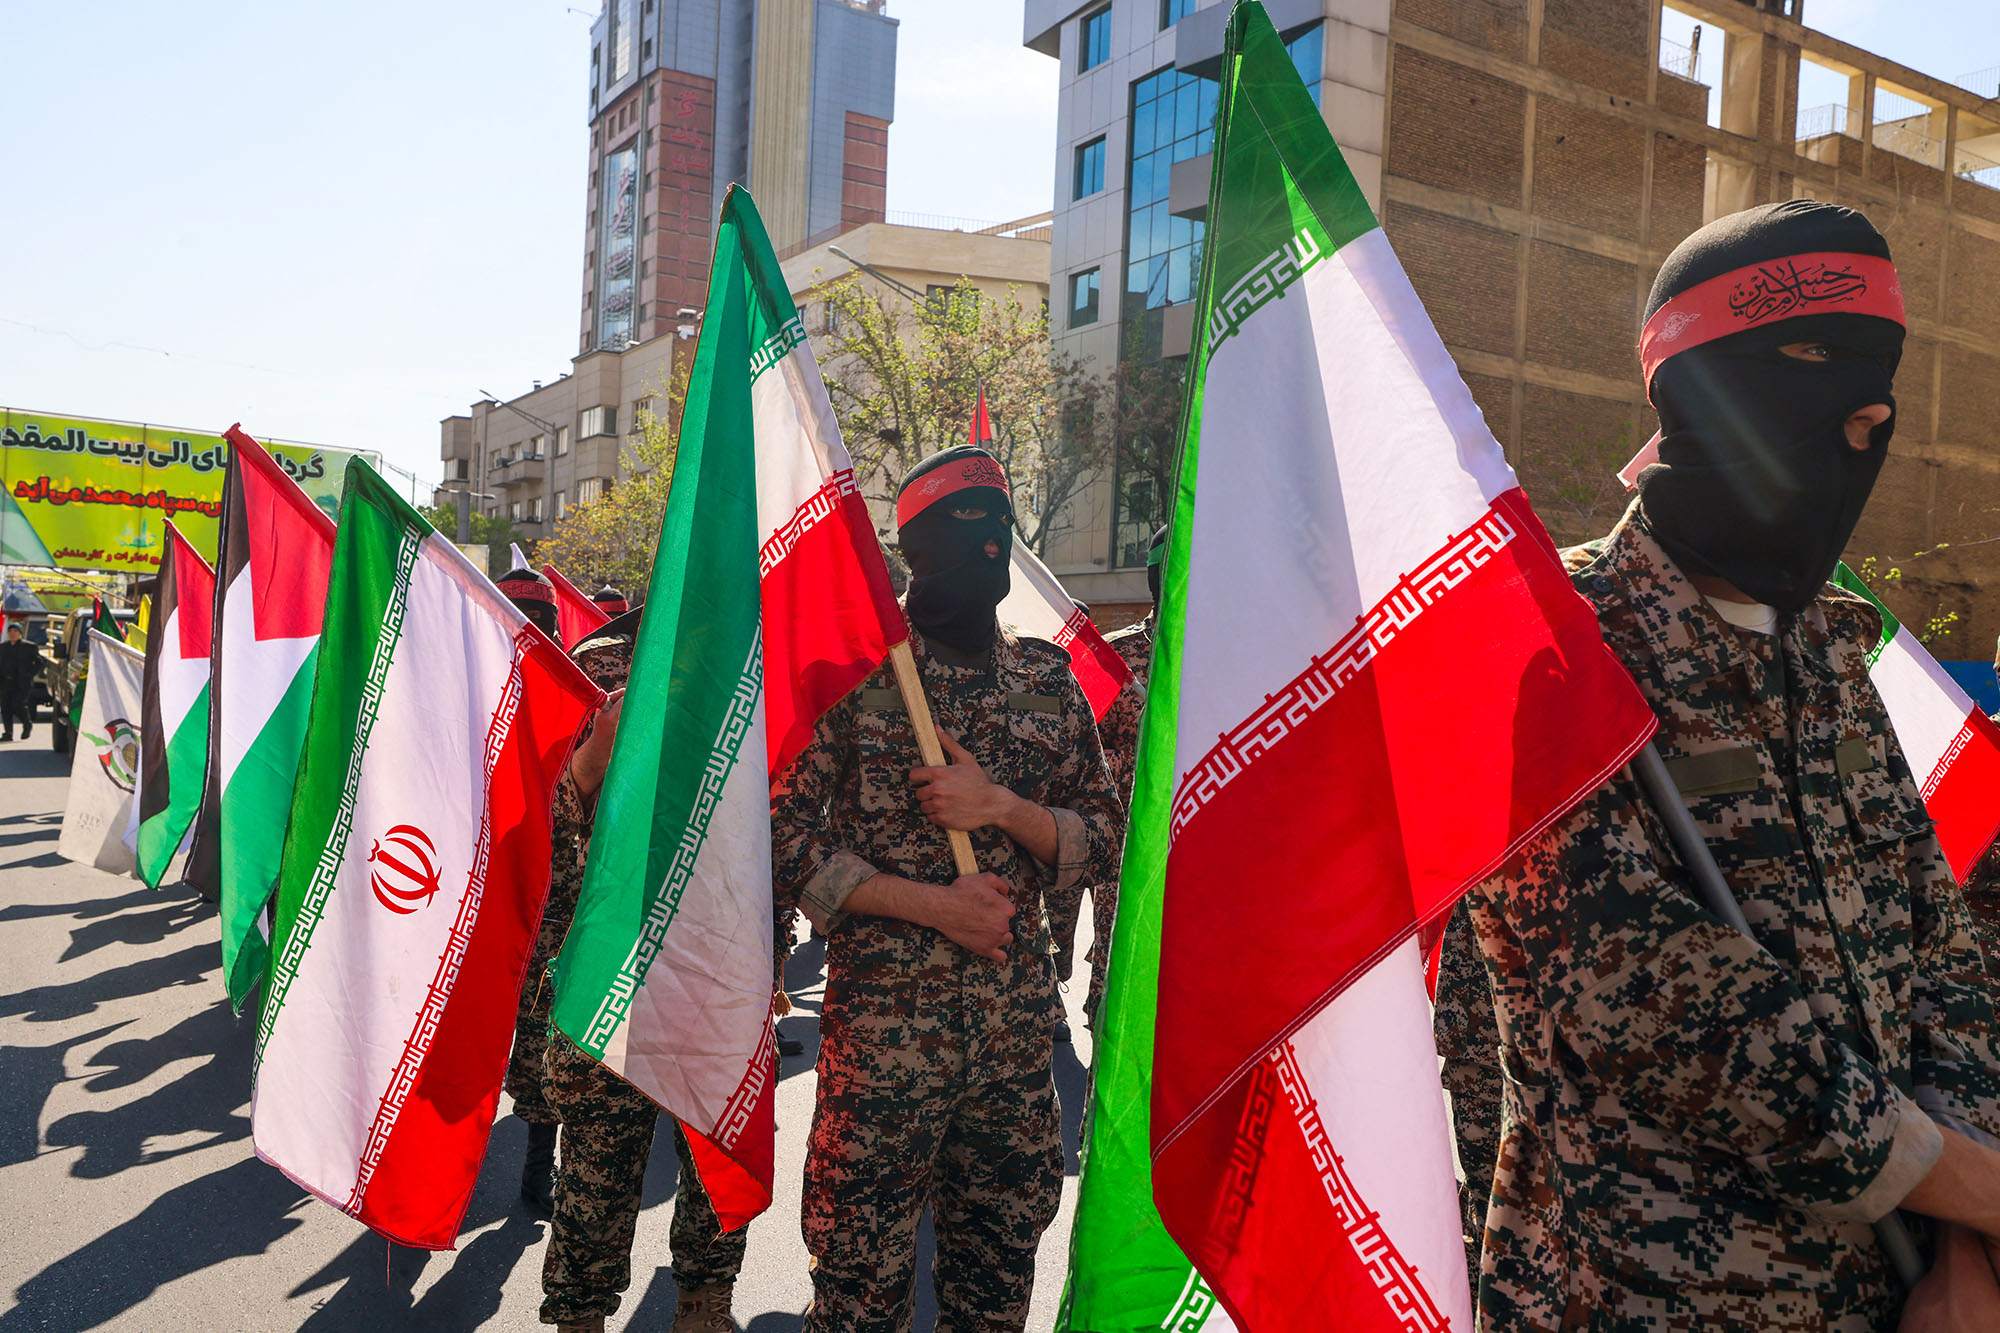 Iranians attend the funeral procession for seven Islamic Revolutionary Guard Corps members killed in a strike on Syria in Tehran, Iran on April 5.